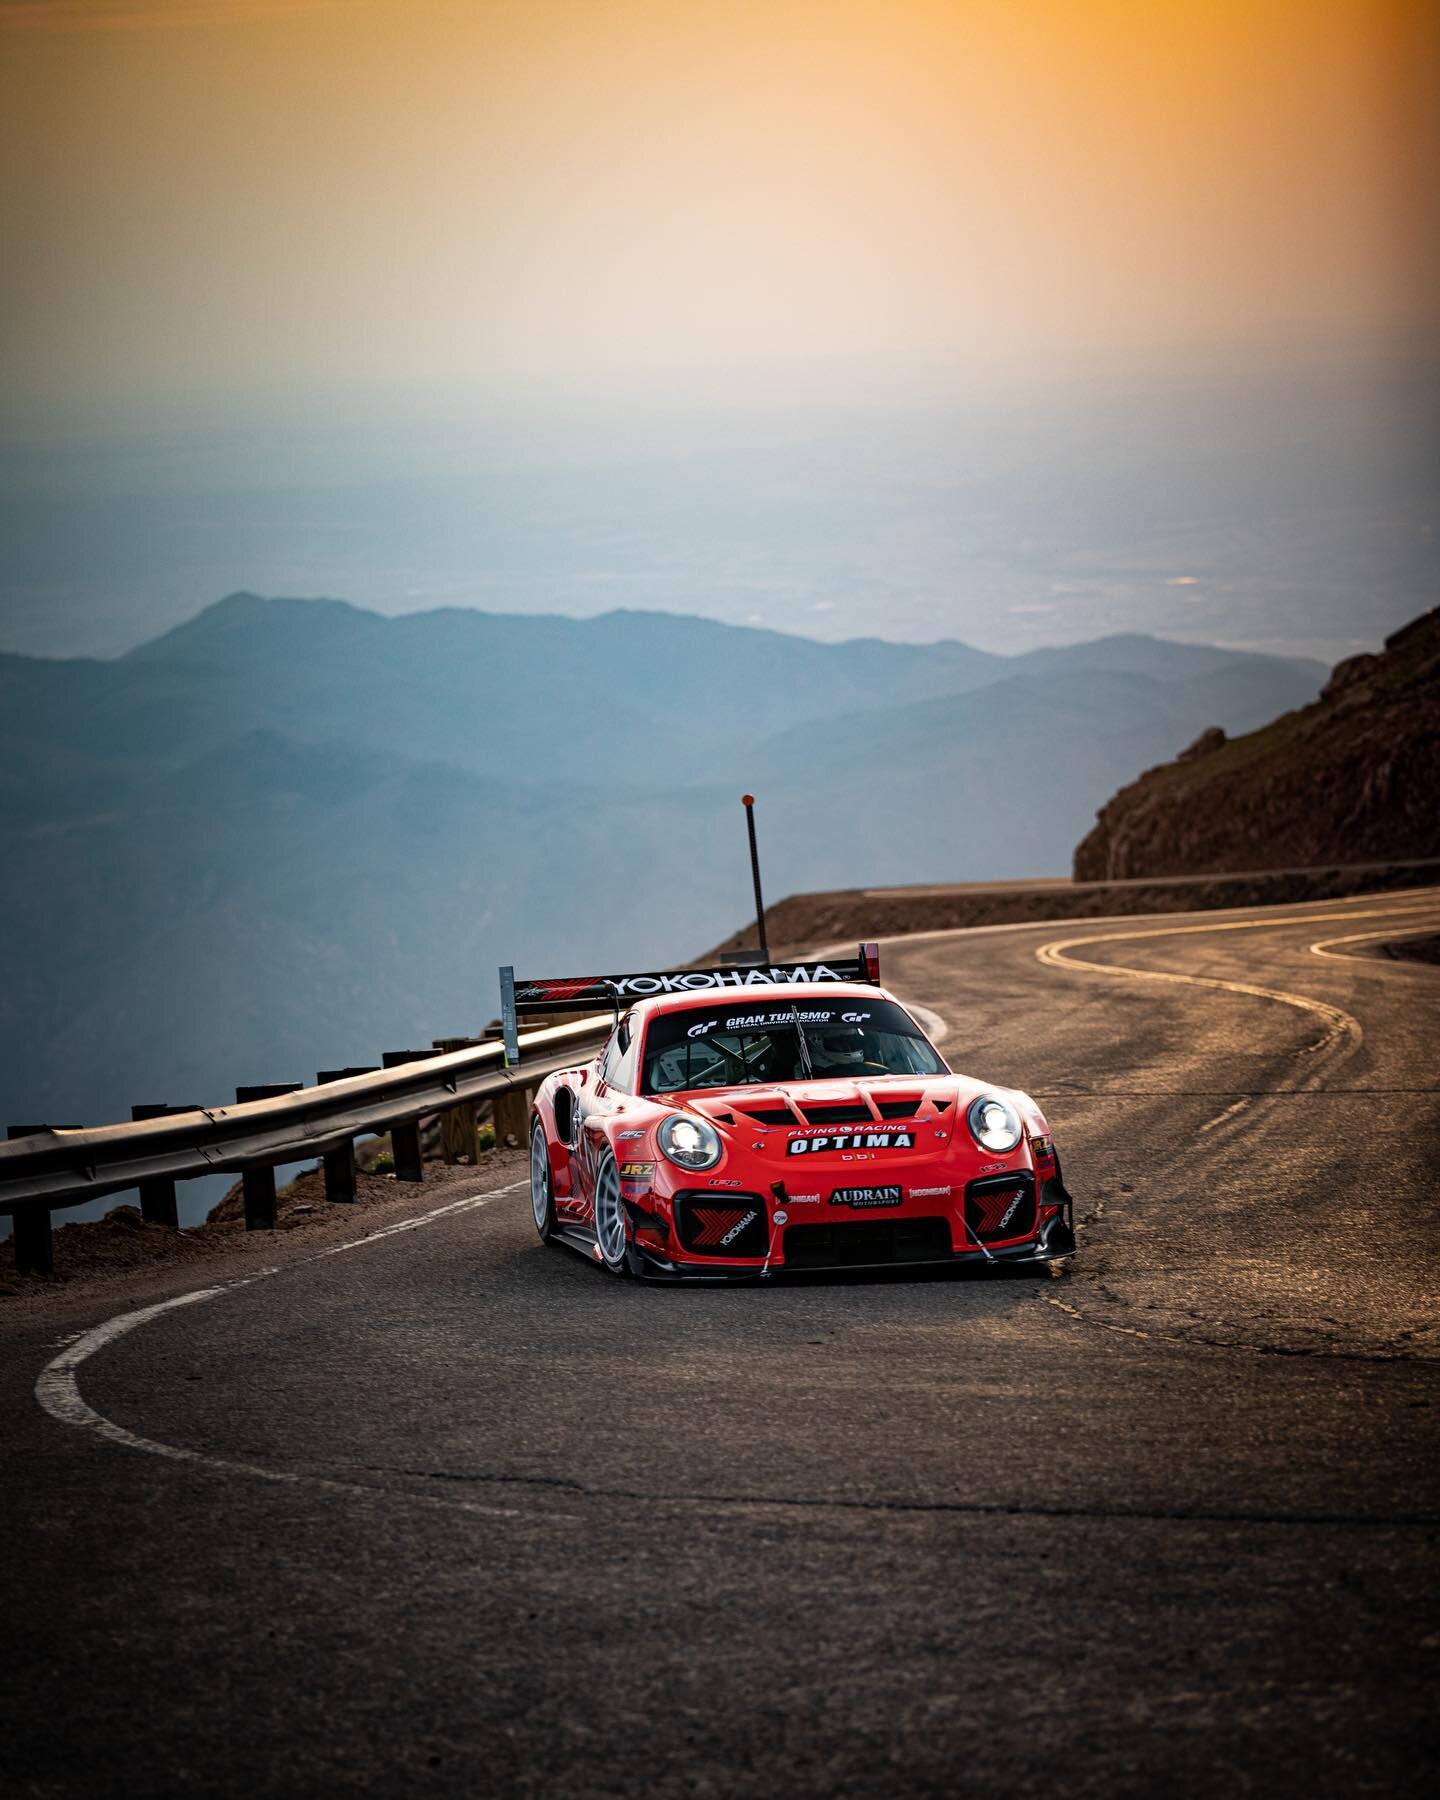 Porsche is no stranger to Pikes Peak &amp; this year @bbiautosport @porscheofthemainline  @porschecolorado brought their revamped 911's. #Lucy2.0 is back amongst a pack of stacked automobiles and drivers 

@raph_astier shot by @pkolinskiphoto (@pkriz